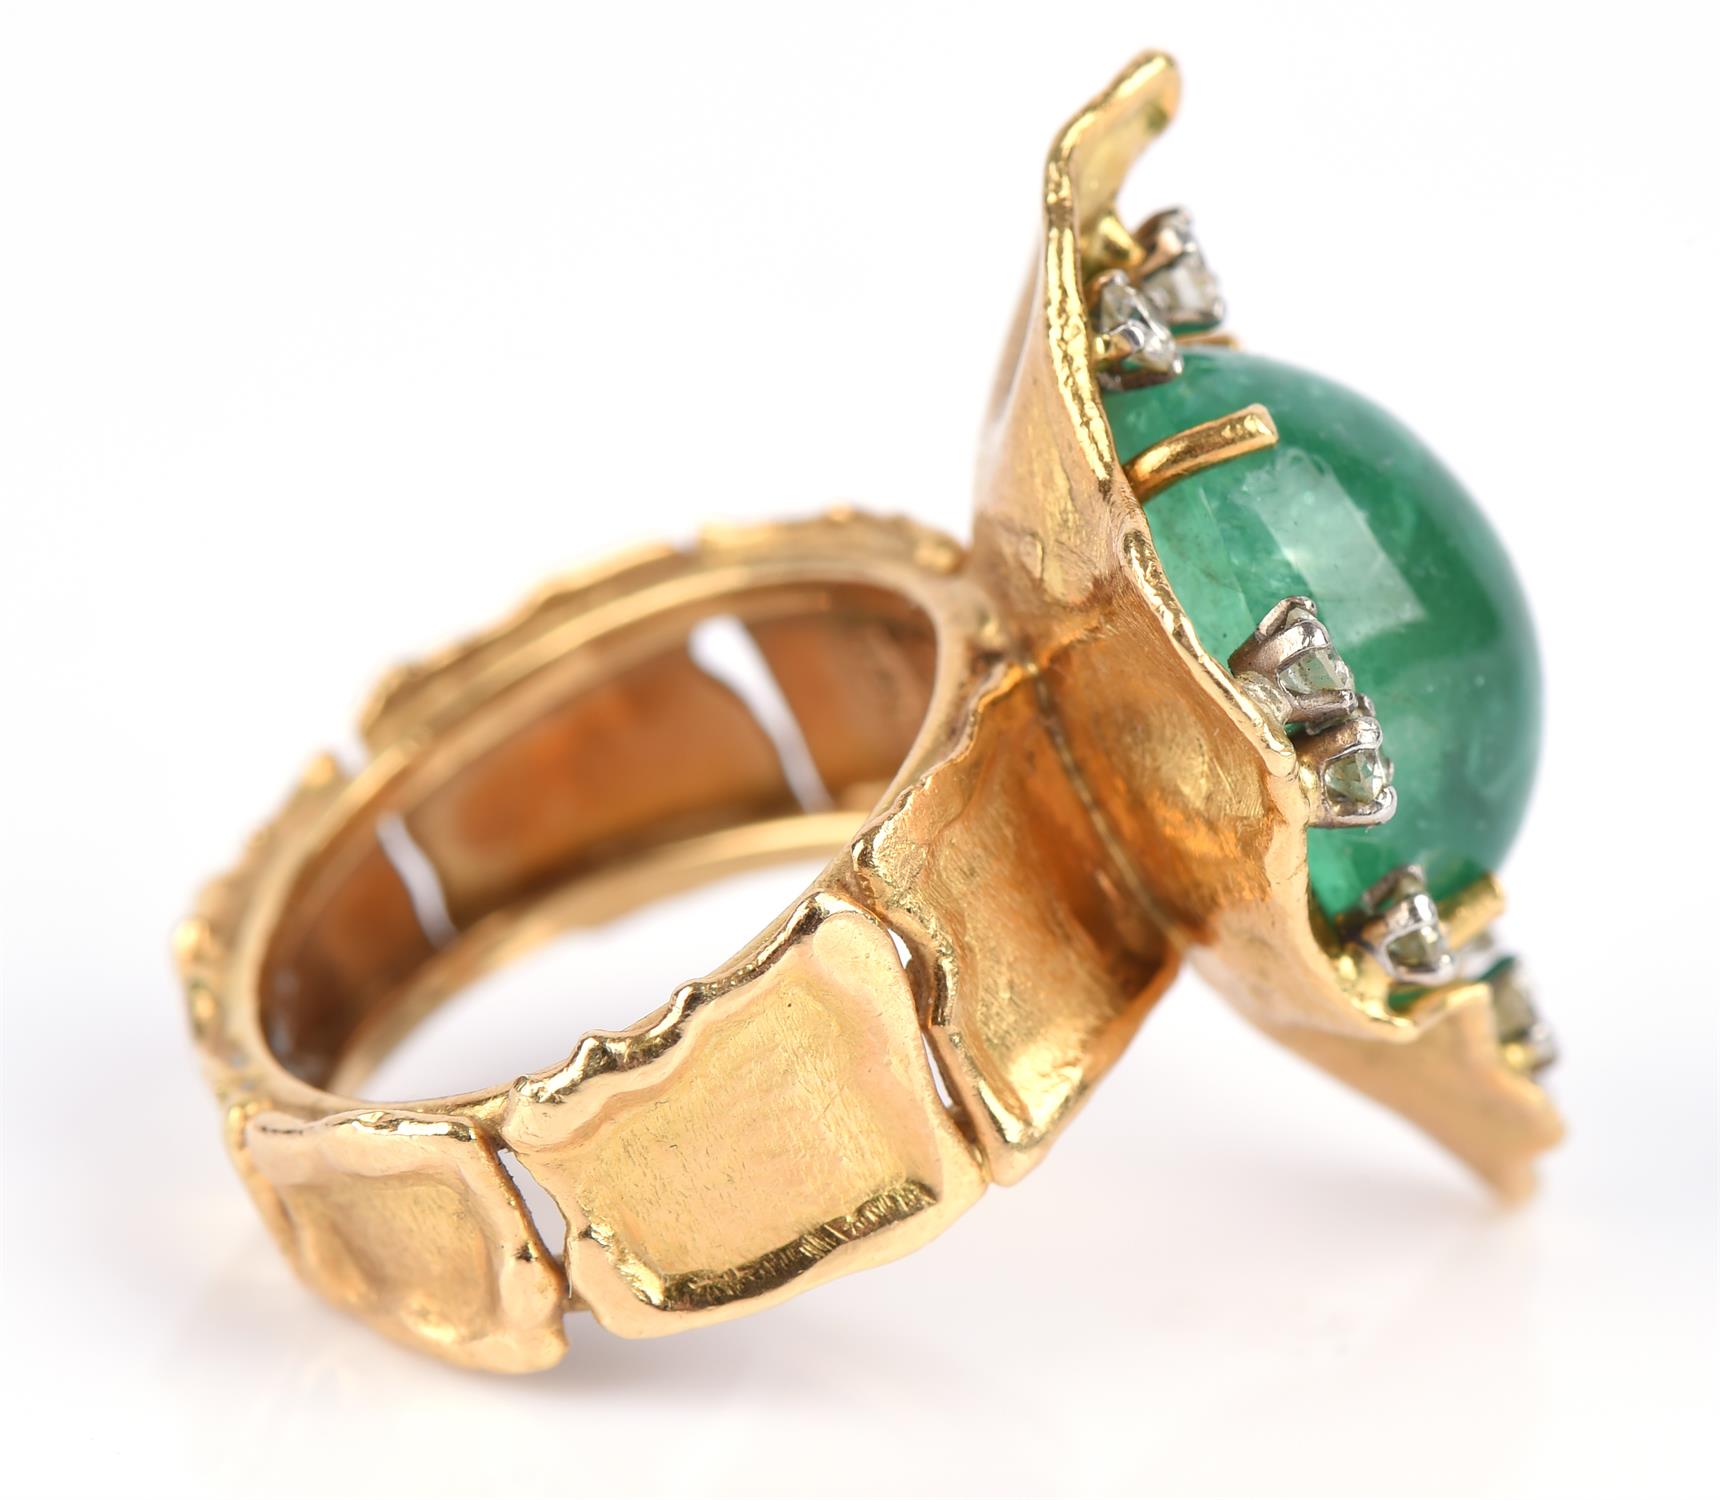 George Weil vintage emerald dress ring, central oval cabochon cut emerald estimated weight 13. - Image 2 of 6